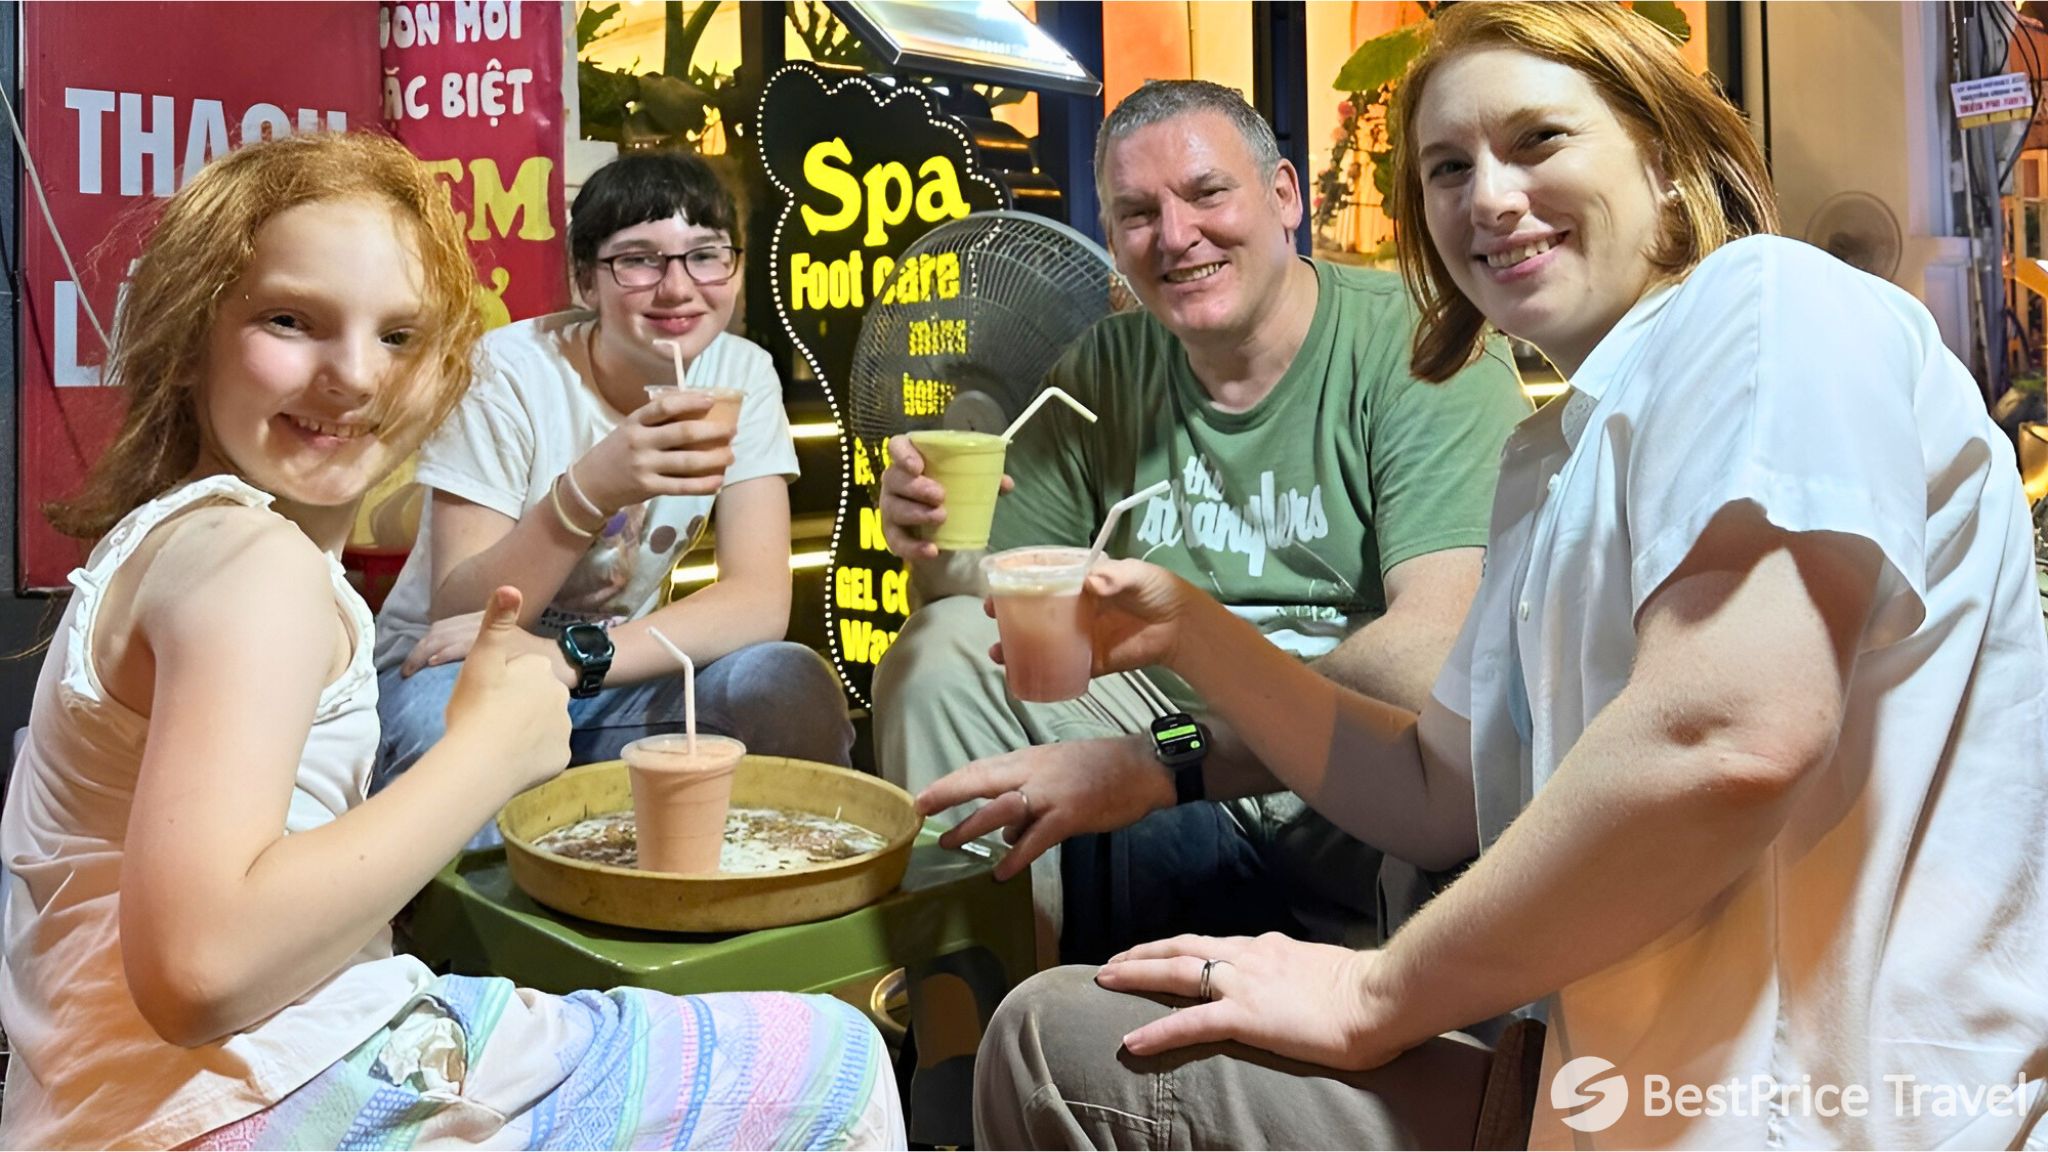 Day 1 Explore Vietnamese Cuisine By Joining A Food Tour